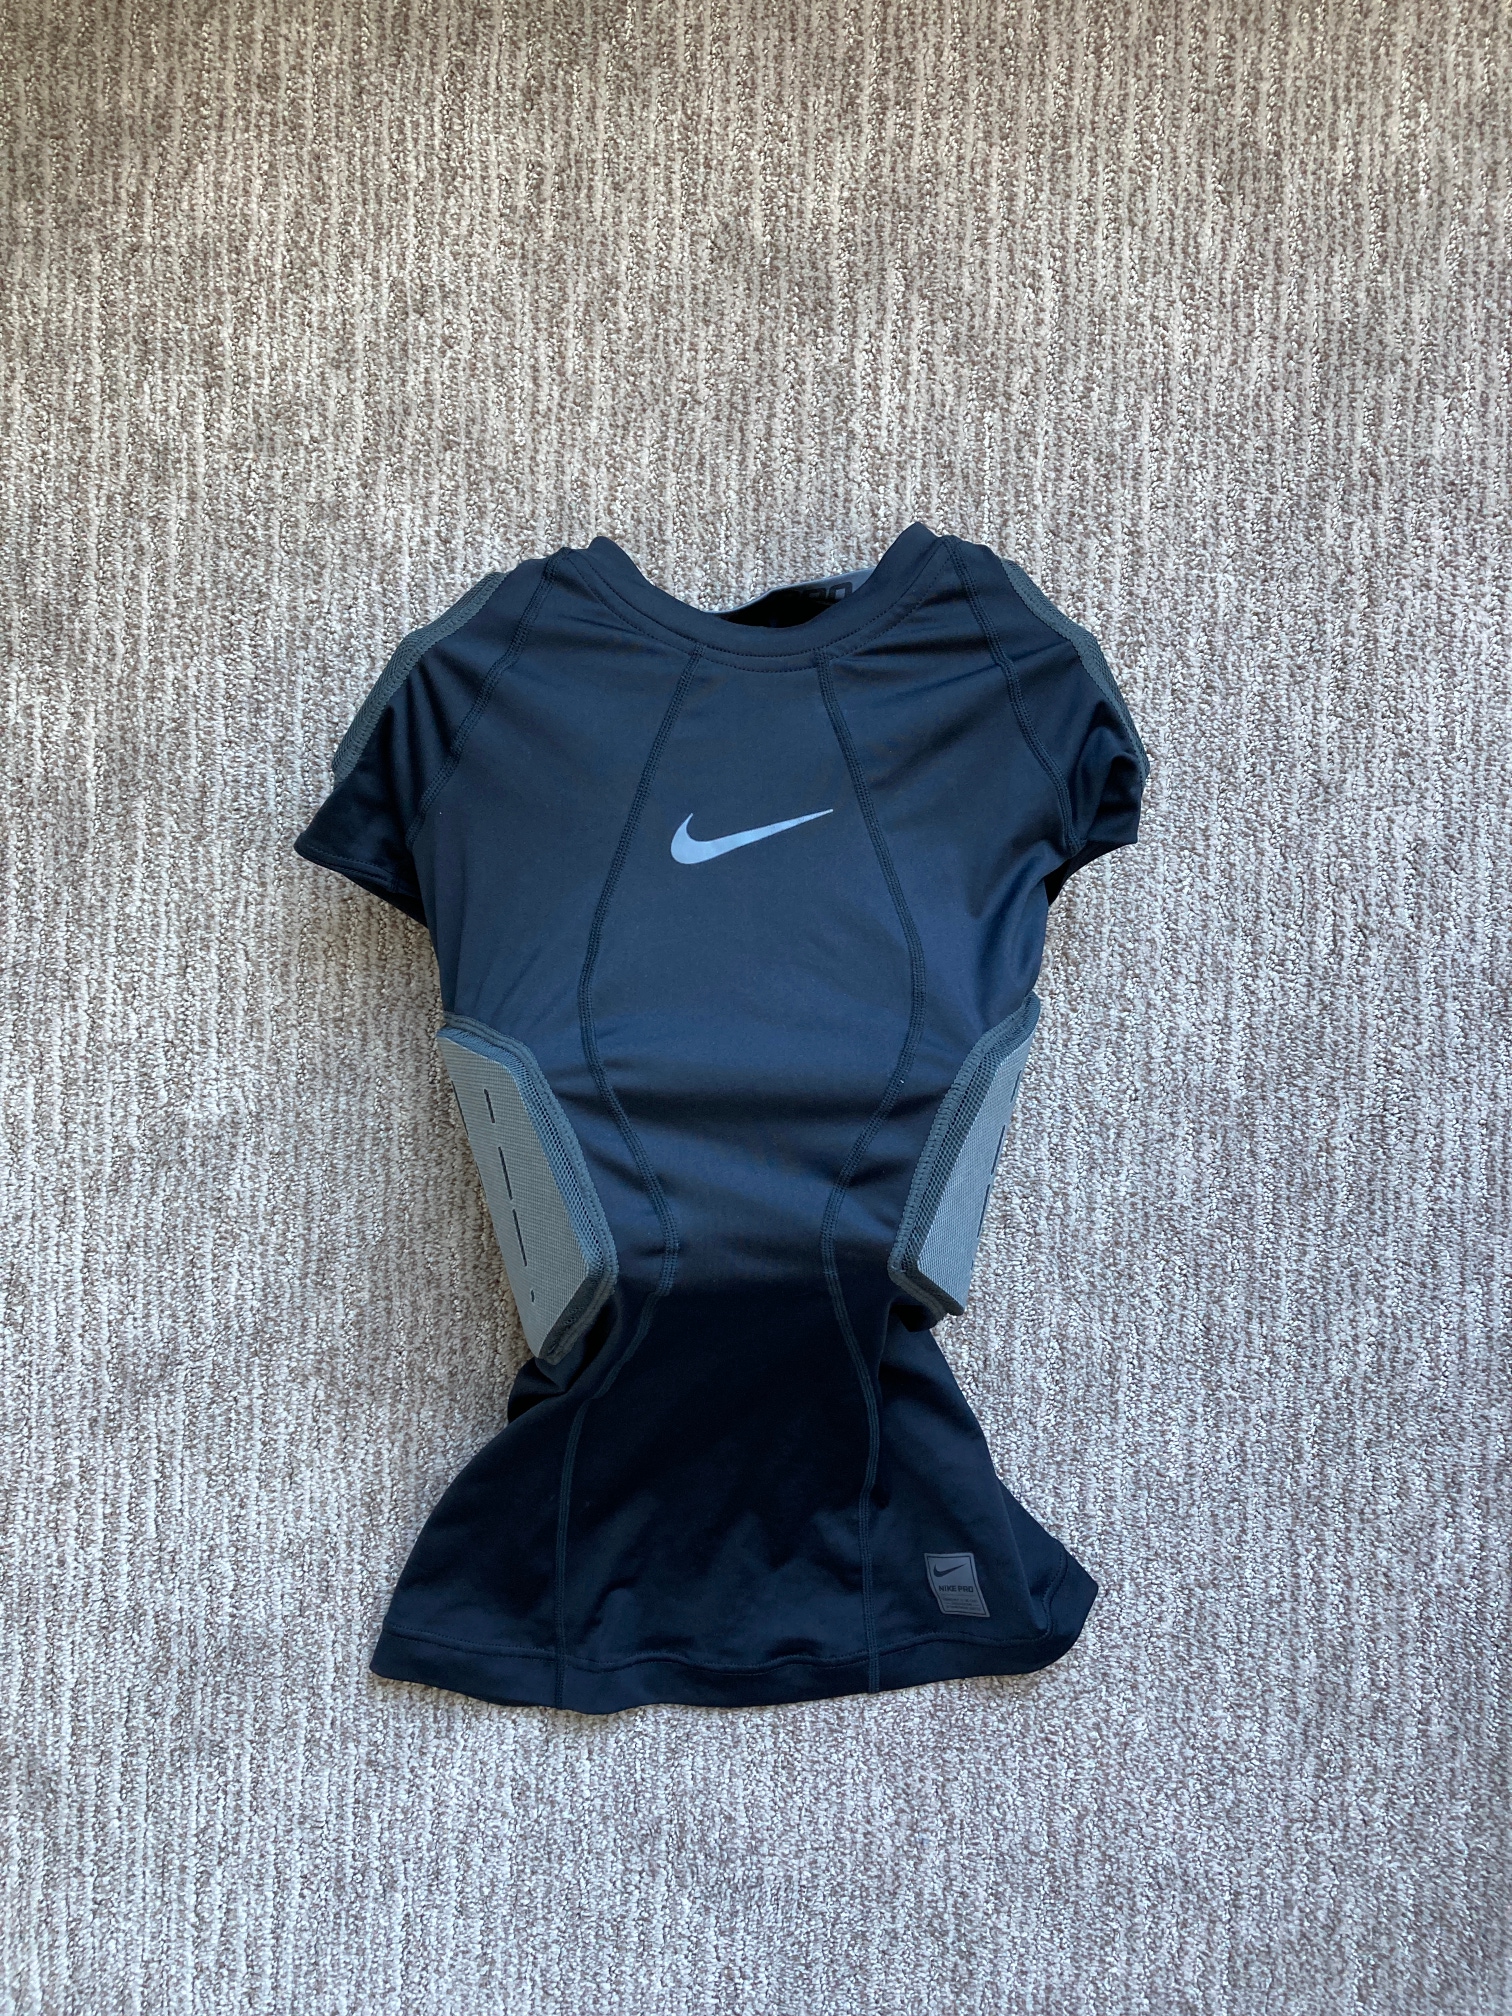 Men's Small Nike Pro Combat Hyperstrong 3.0 Football Integrated Padded Shirt Black Gray